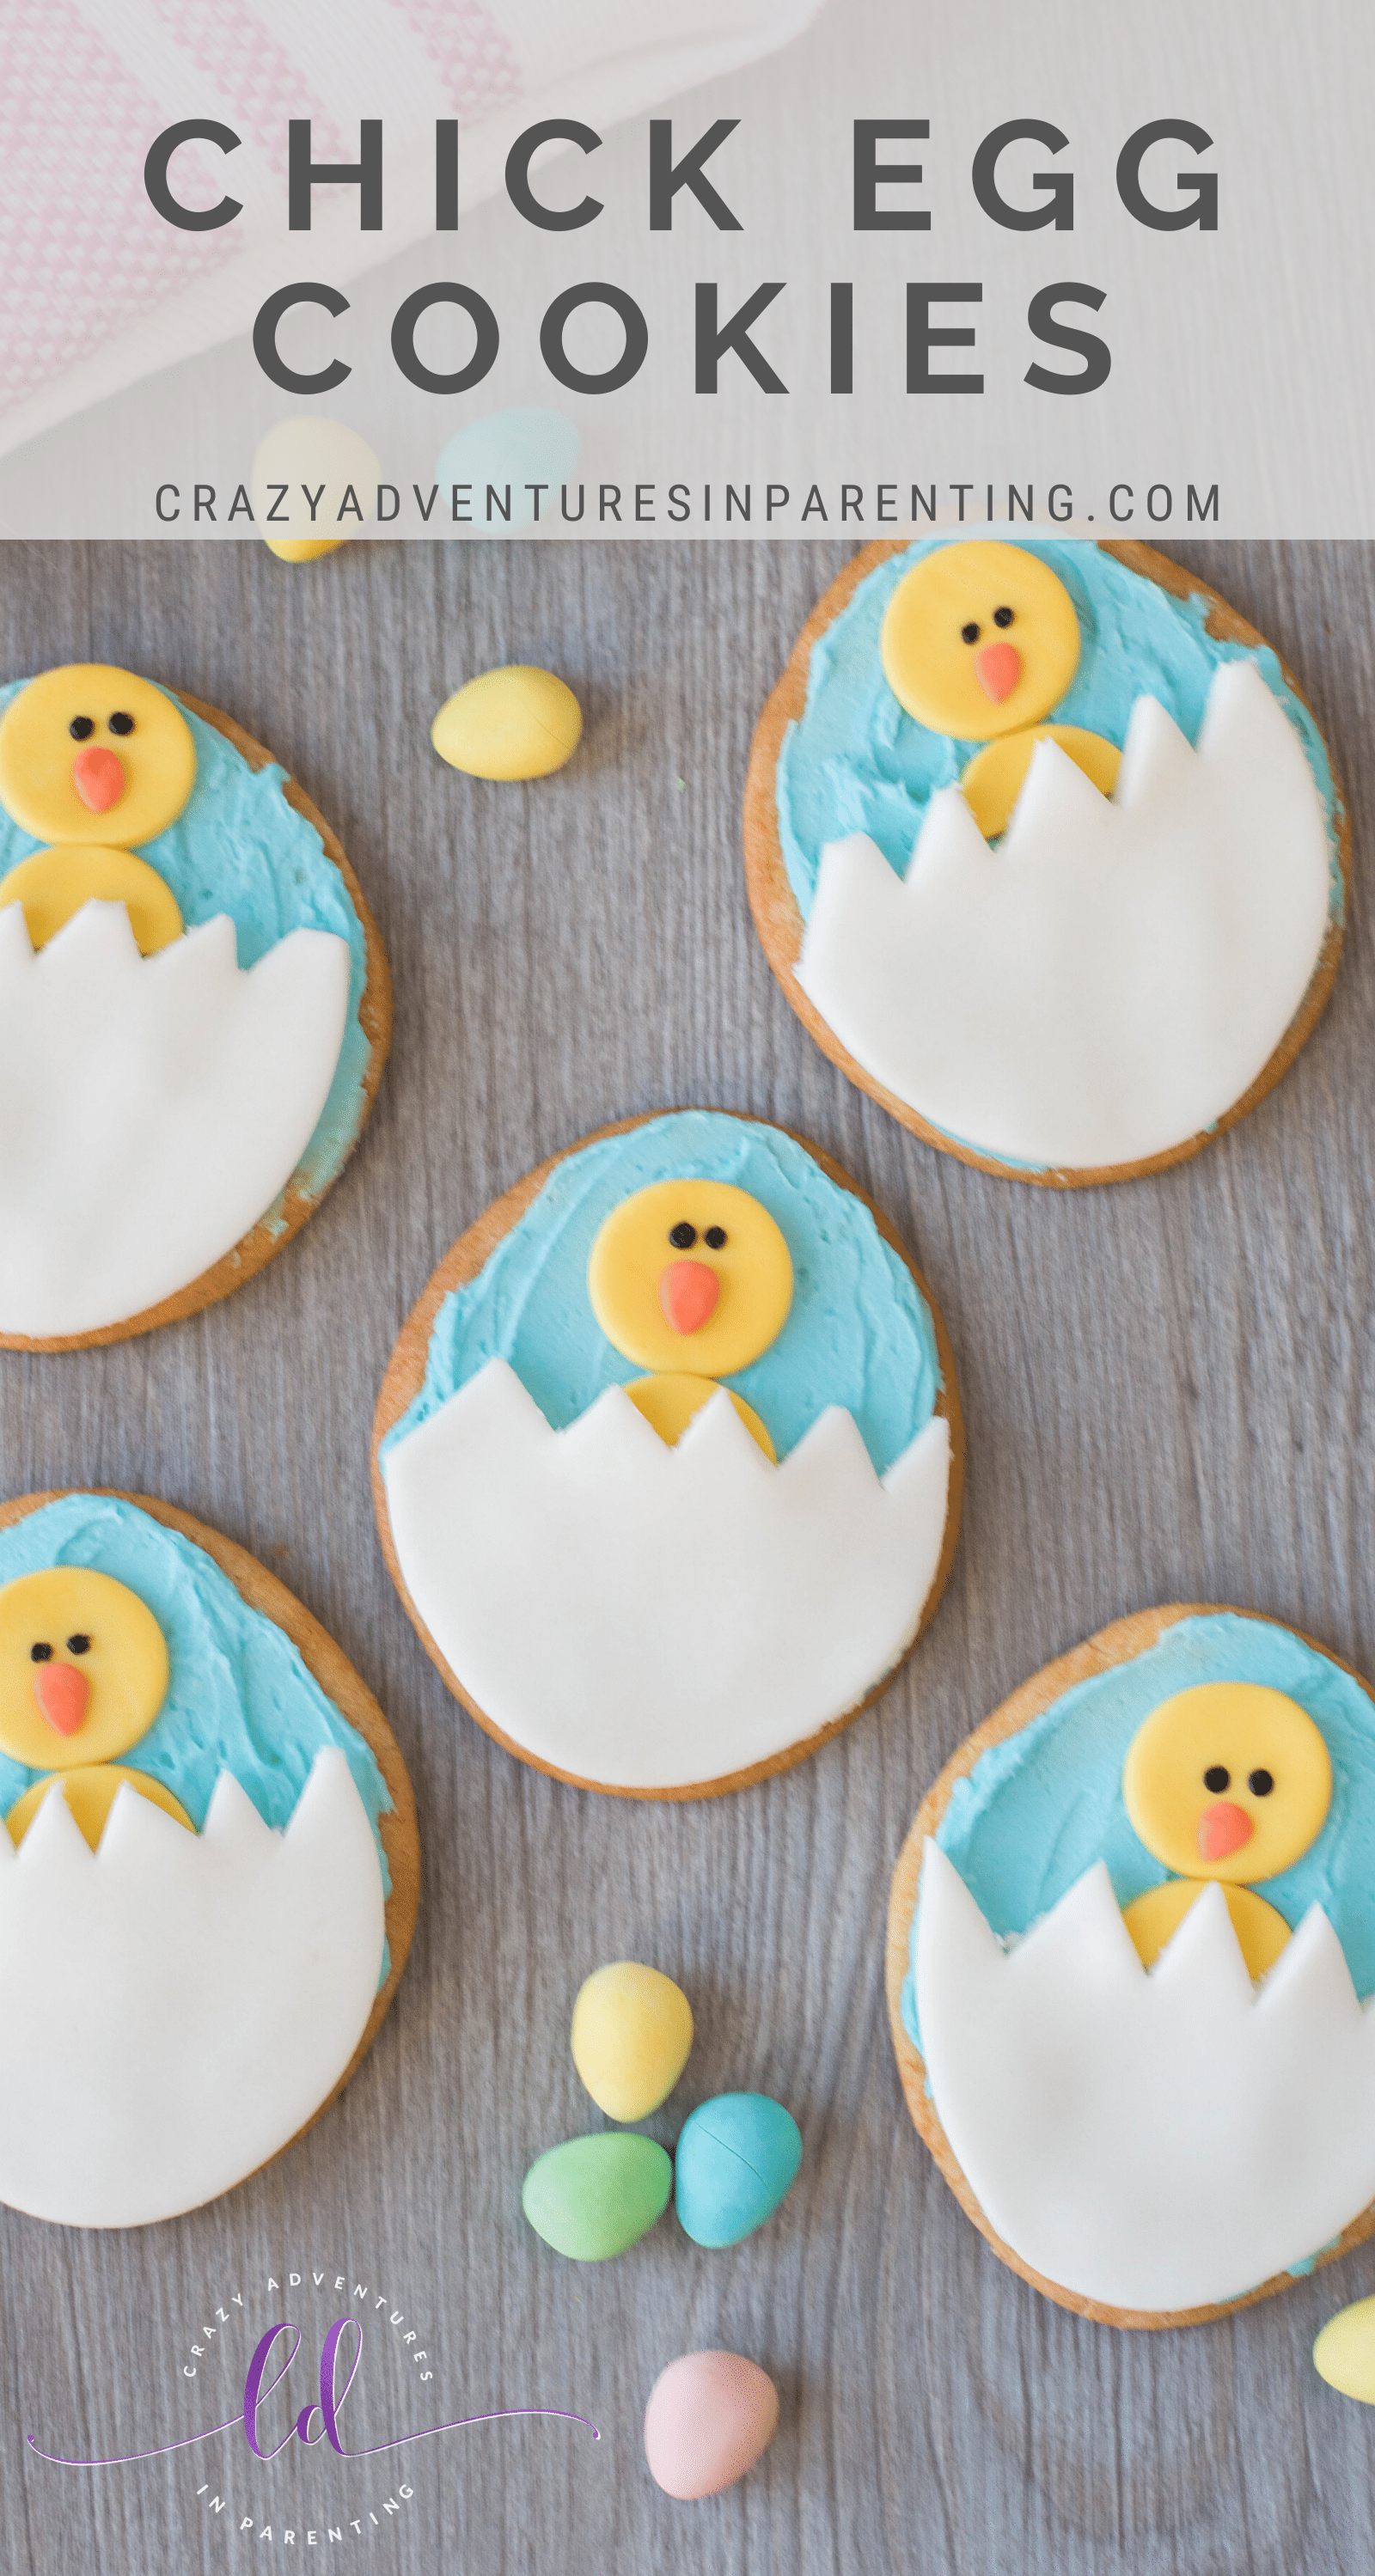 Chick Egg Cookies